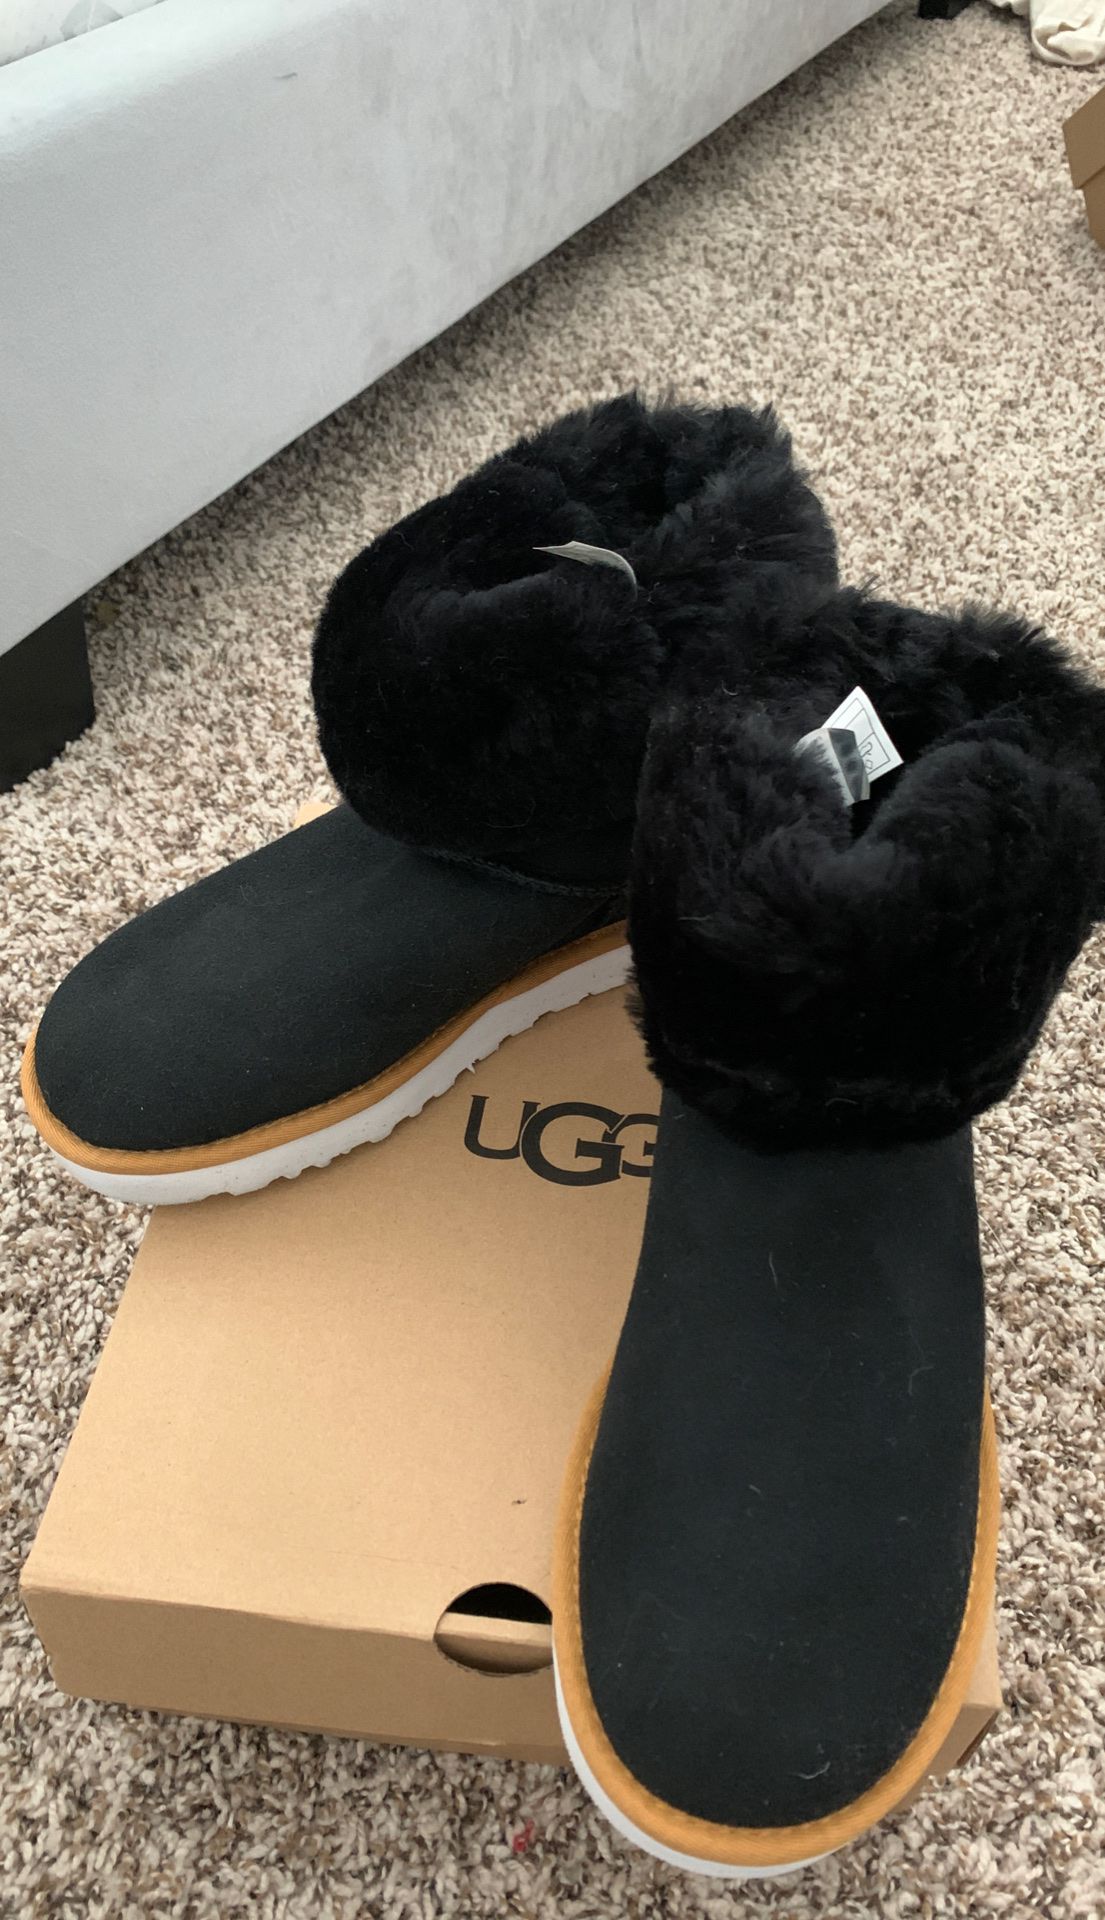 UGGs boots, women size 7, new, black